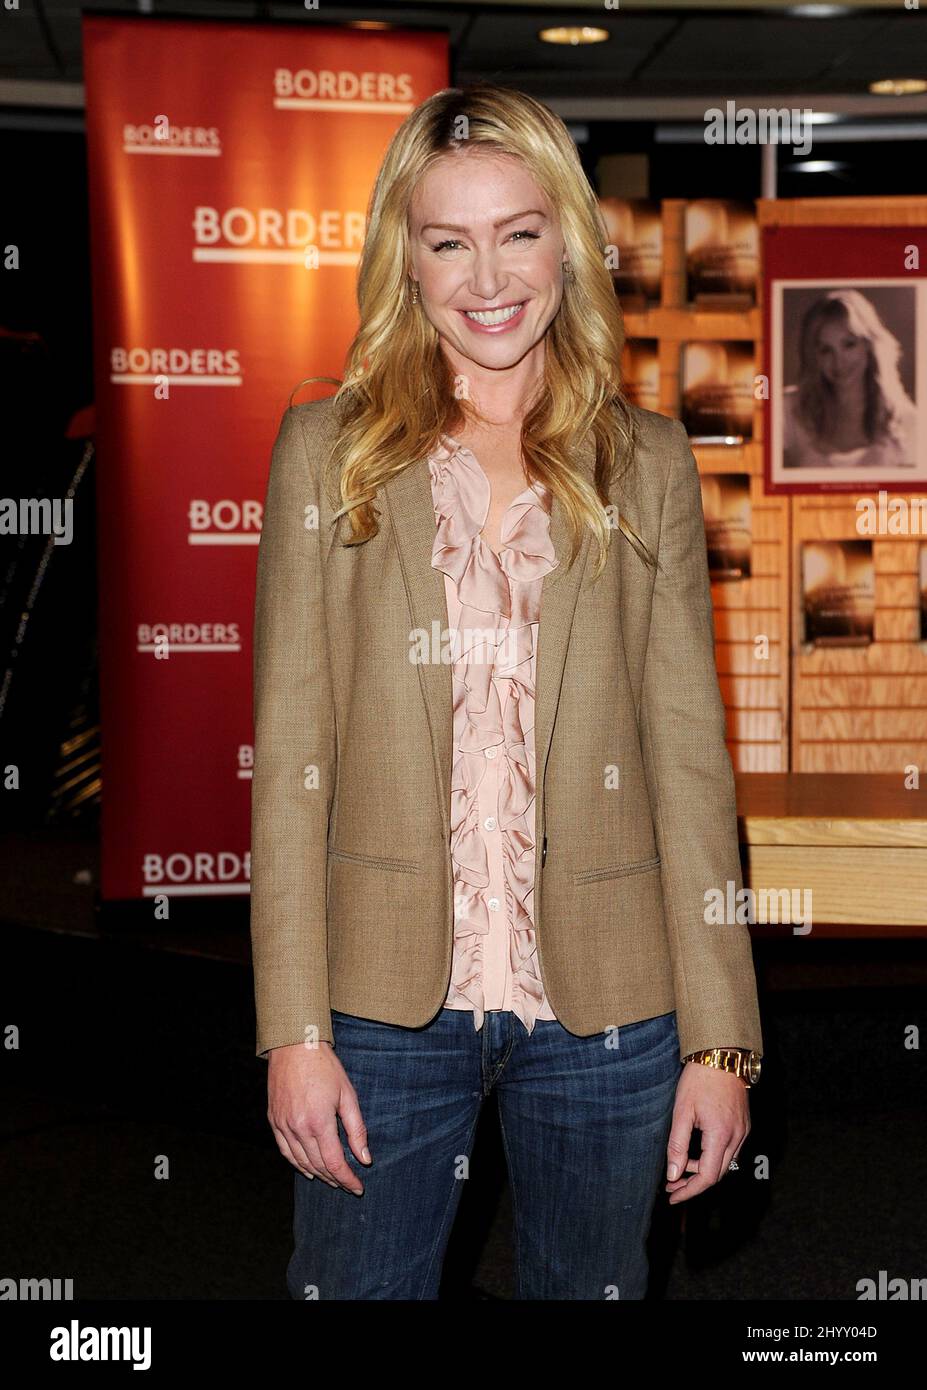 Portia de Rossi signs copies of her new book "Unbearable Lightness" at  Borders in Los Angeles, USA Stock Photo - Alamy